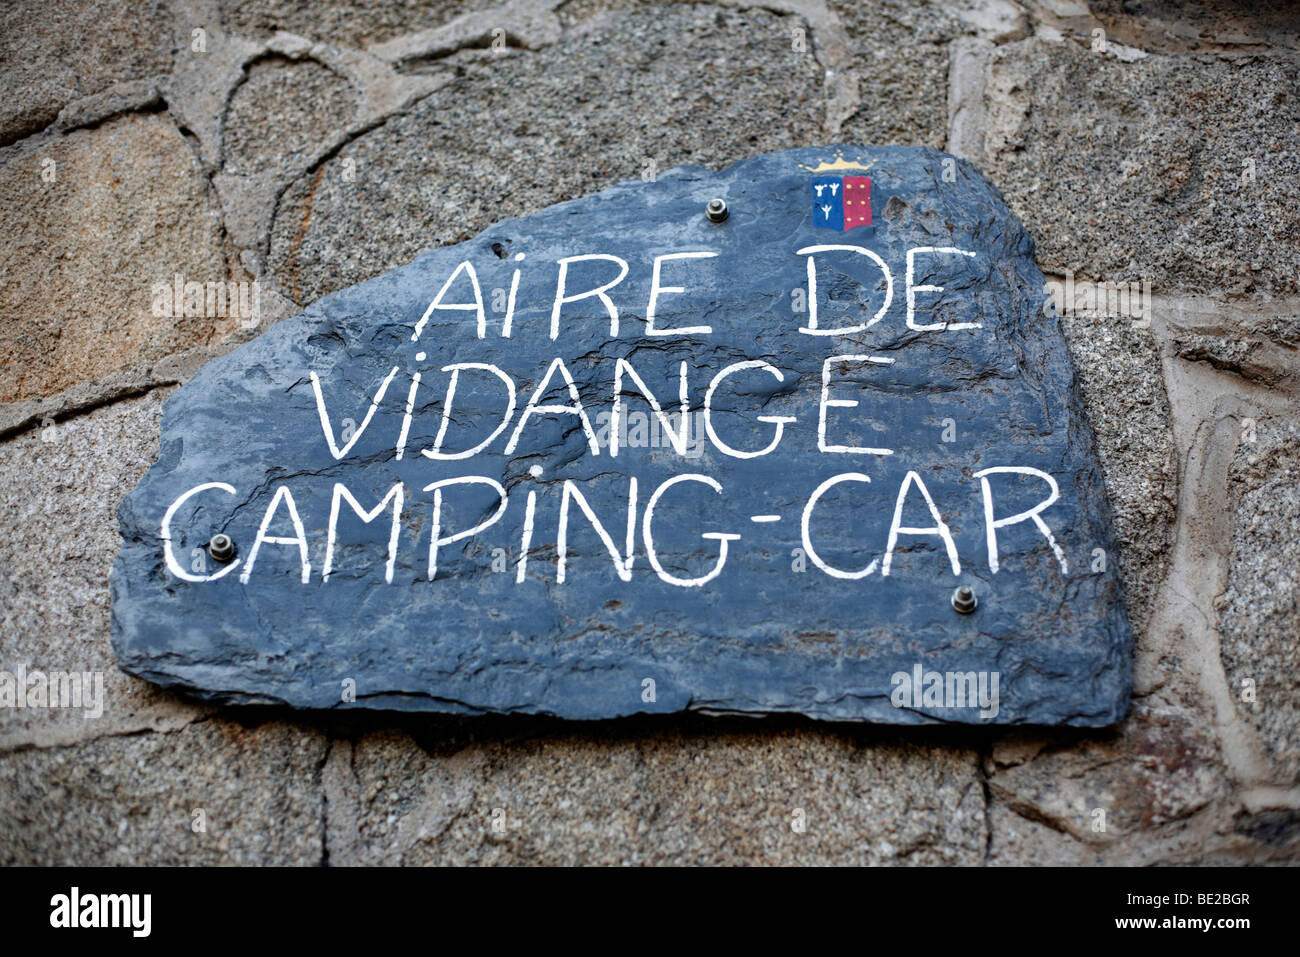 A sign for an aire de vidange camping car or campervan service area in Mont-Louis in the Pyrenees in France Stock Photo